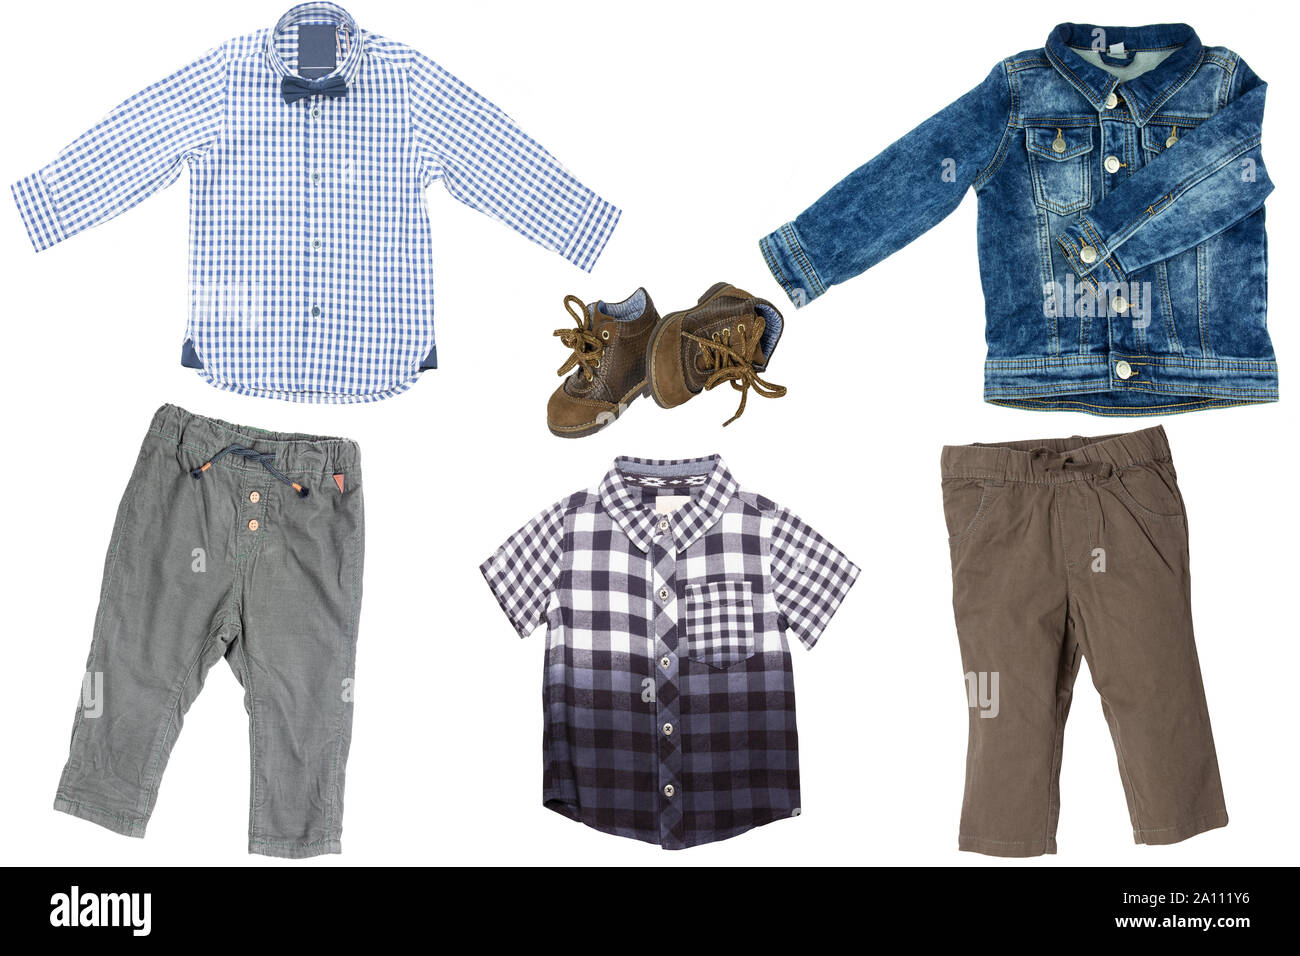 Collage set of children clothes. Two Denim jeans or pants, a pair shoes, a  jeans jacket and two blue checkered shirts or t-shirts for child boy isola  Stock Photo - Alamy